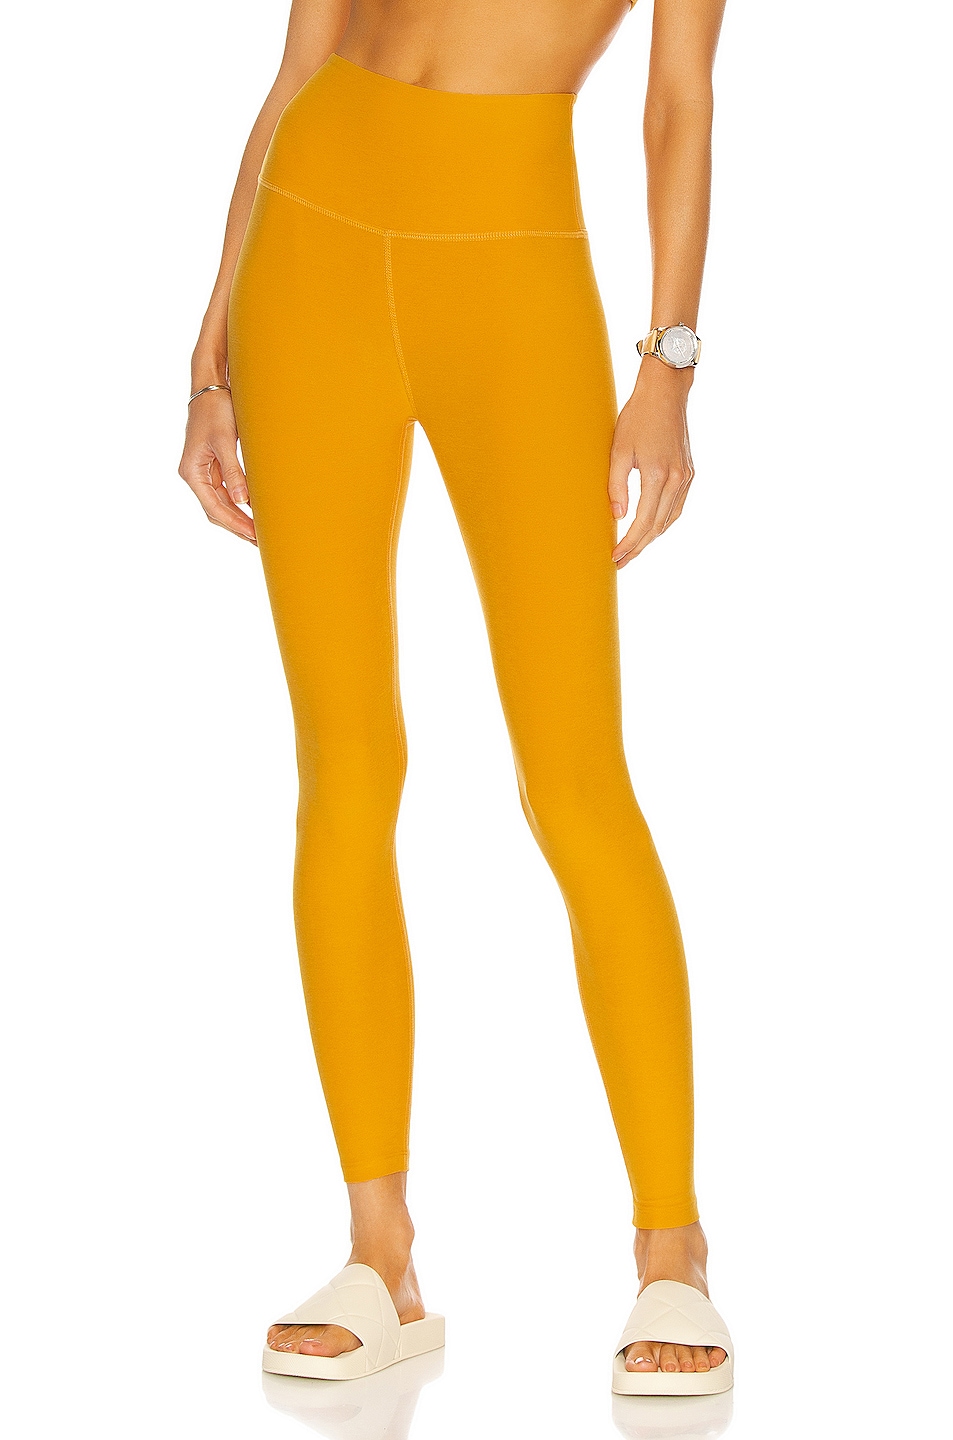 Image 1 of Beyond Yoga Spacedye Caught in the Midi High Waisted Legging in Sunny Citrine Solid